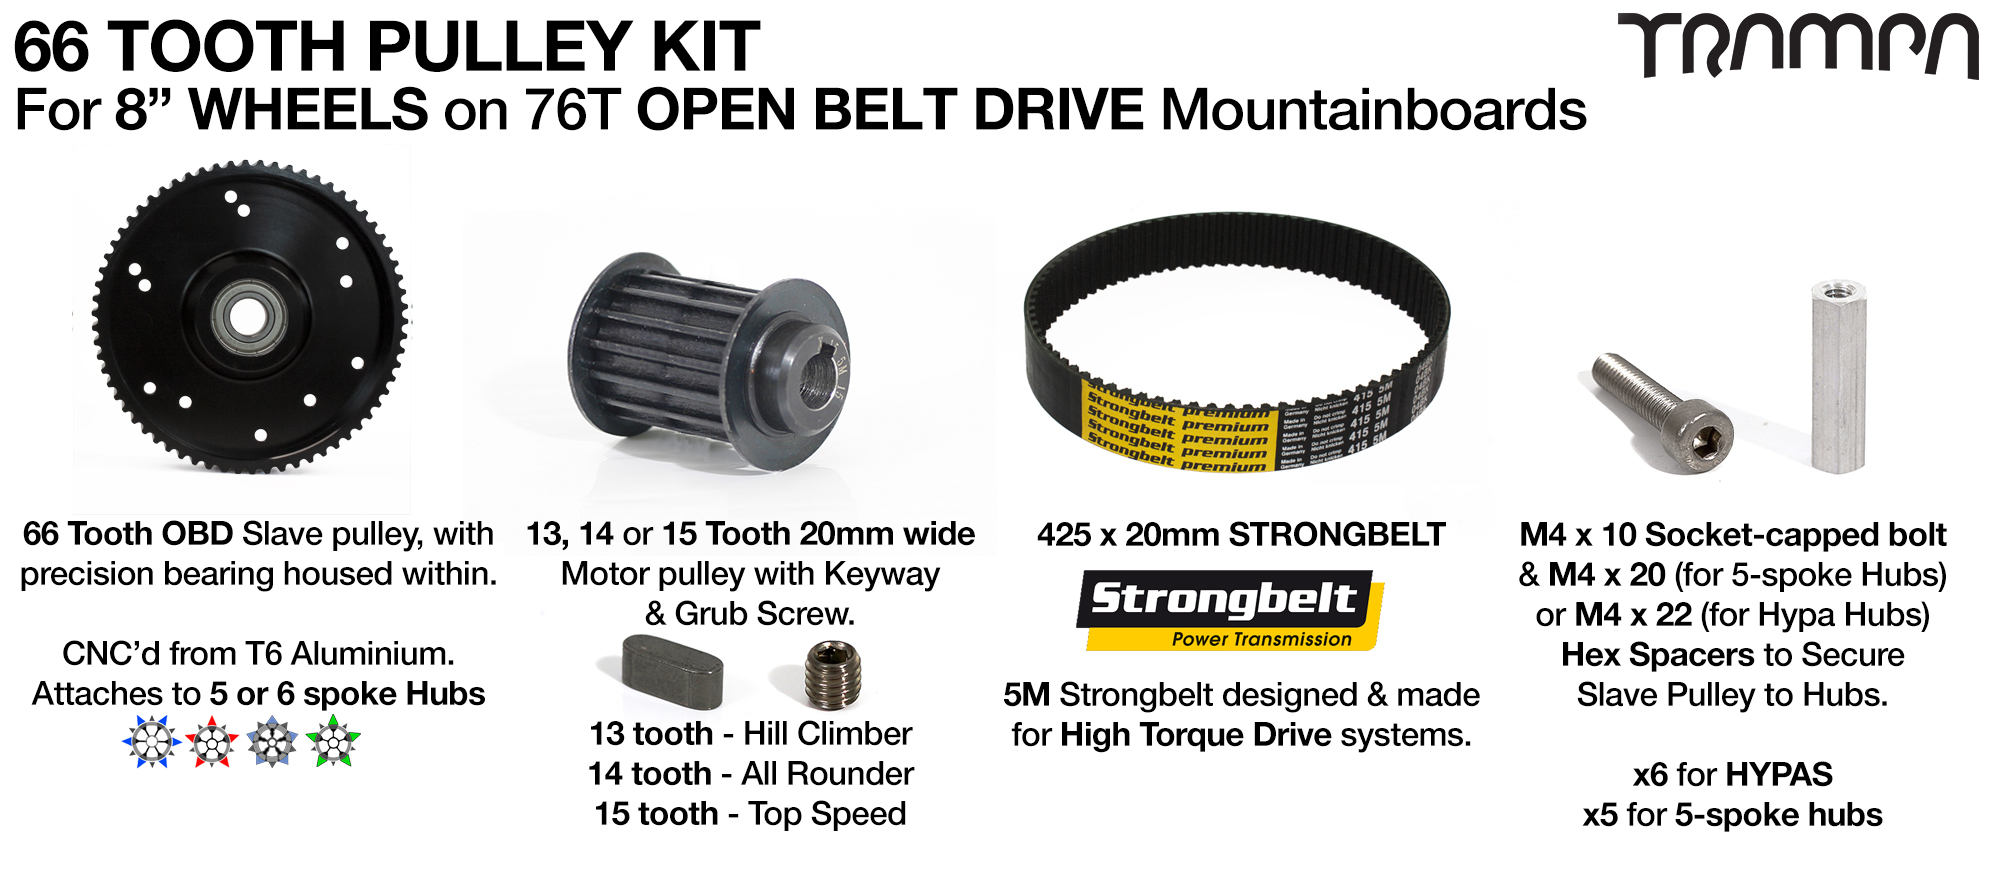 76T OBD Panel with 8 Inch Wheels - 66 Tooth Pulley Kit & 425 x 20mm Belt 